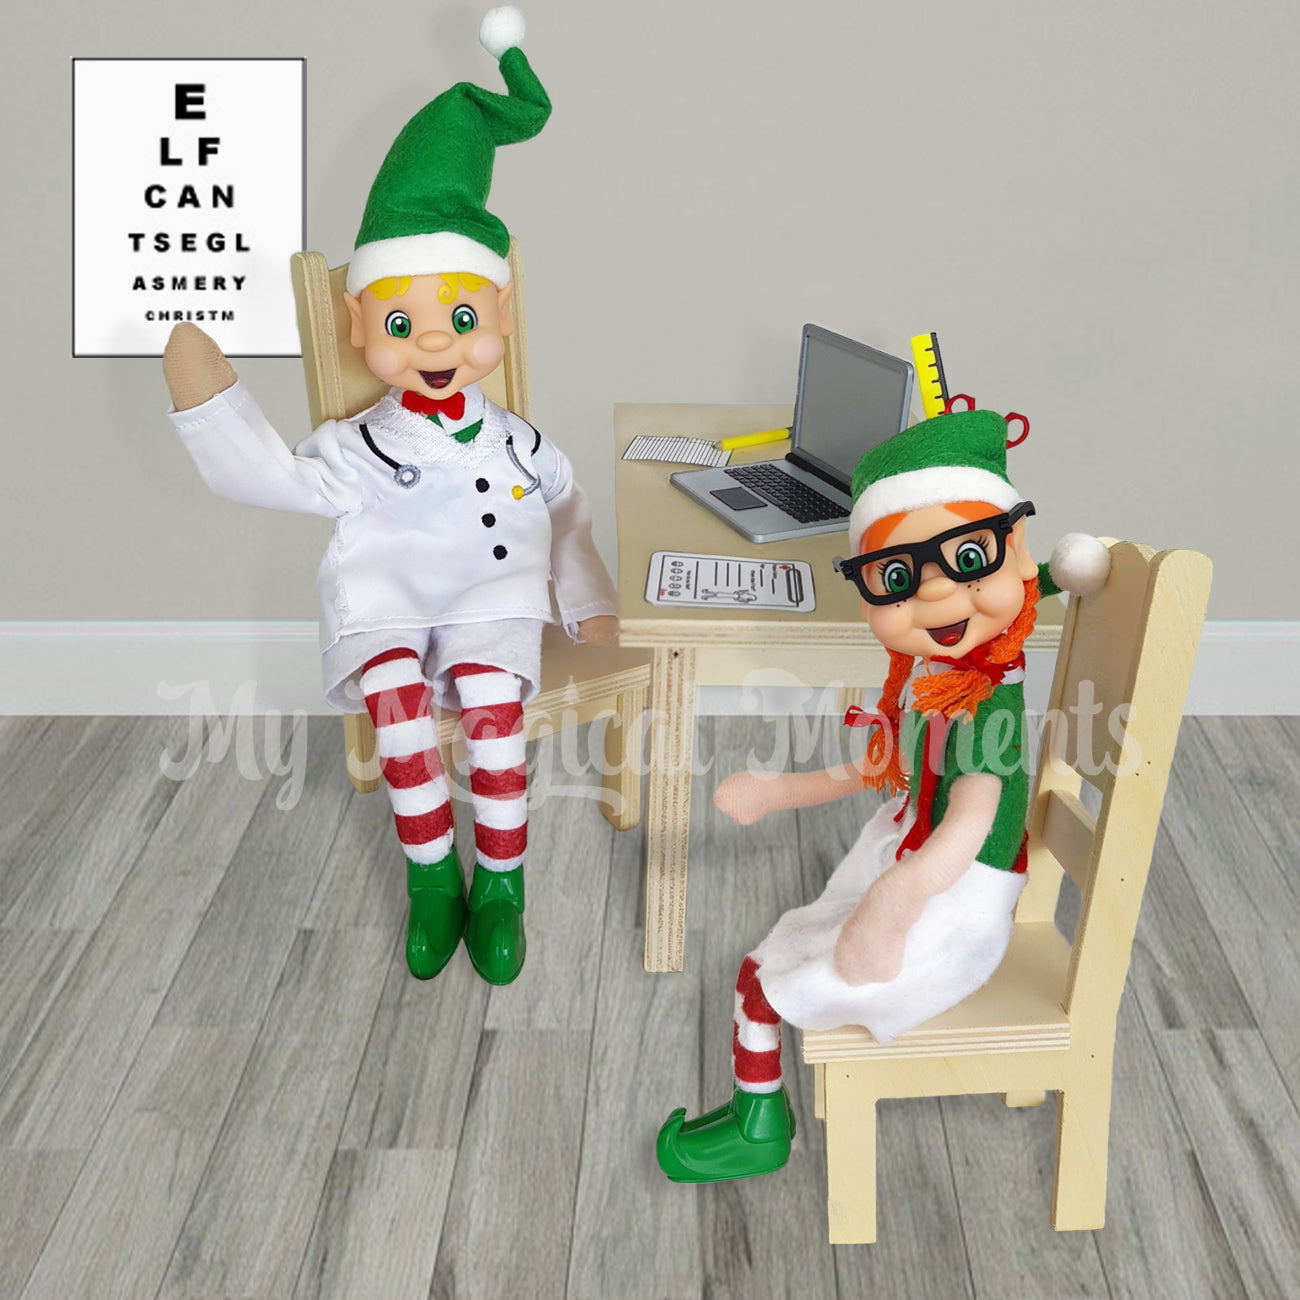 Elf Optometrist scene. Pointing to a printable eye chart. With a orange hair girl elf wearing glasses. There is a wooden desk with a miniature laptop and clipboard.